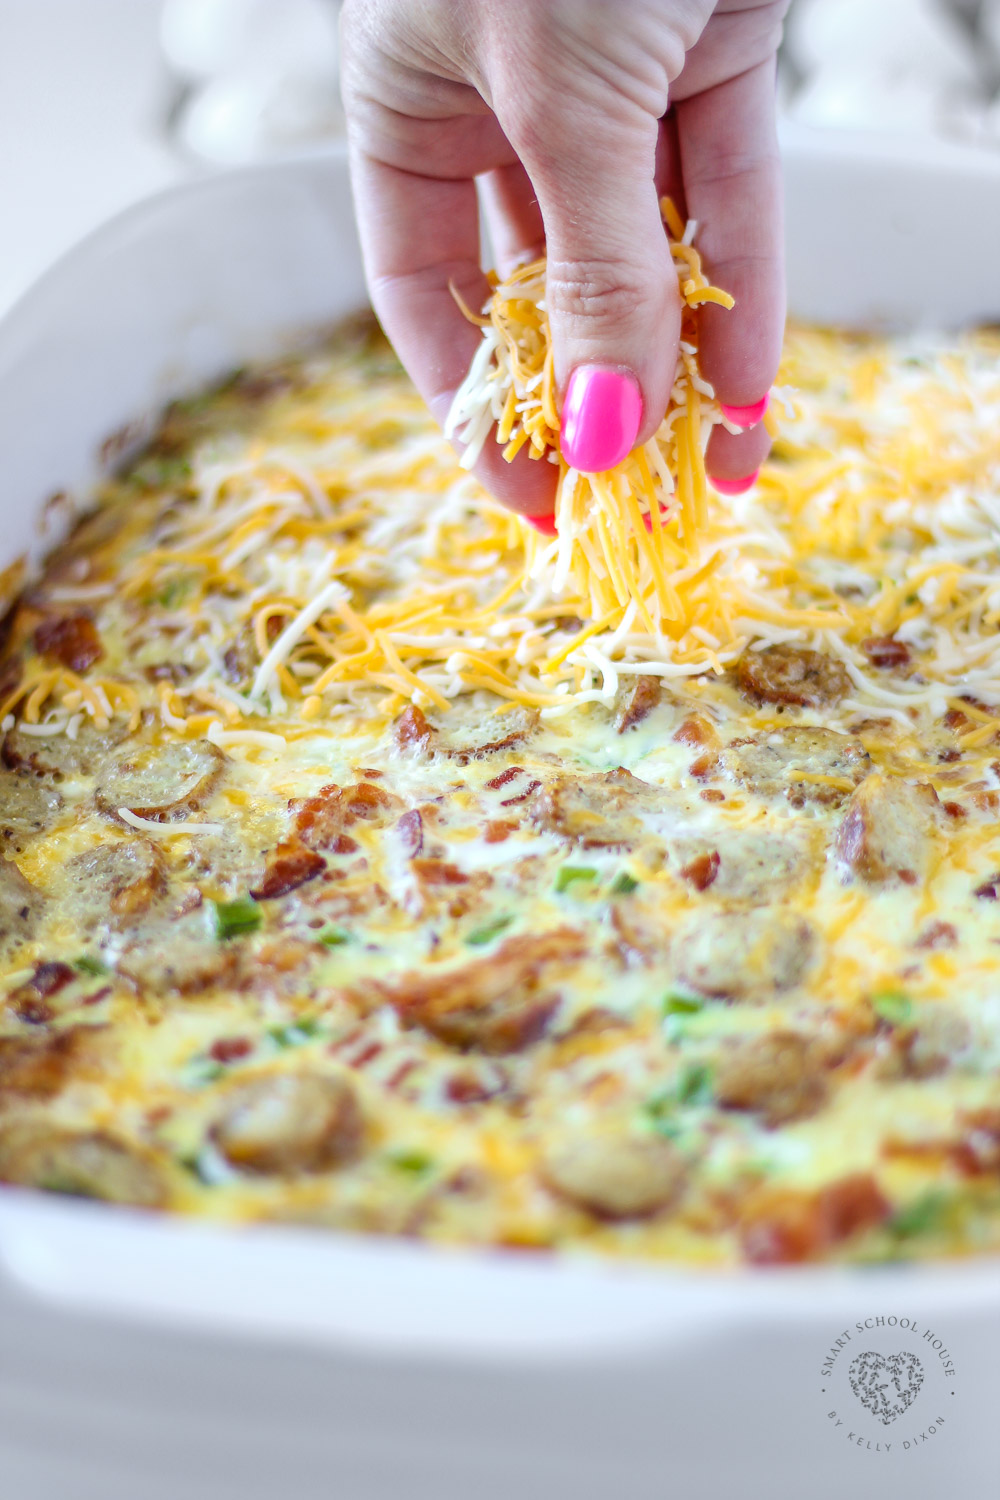 Loaded Hash Brown Breakfast Casserole made with hash brown patties! A wonderful comforting egg casserole loaded with bacon, sausage, and cheese #breakfastcasserole #hasbrowncasserole #hasbrownpattycasserole #breakfastrecipes